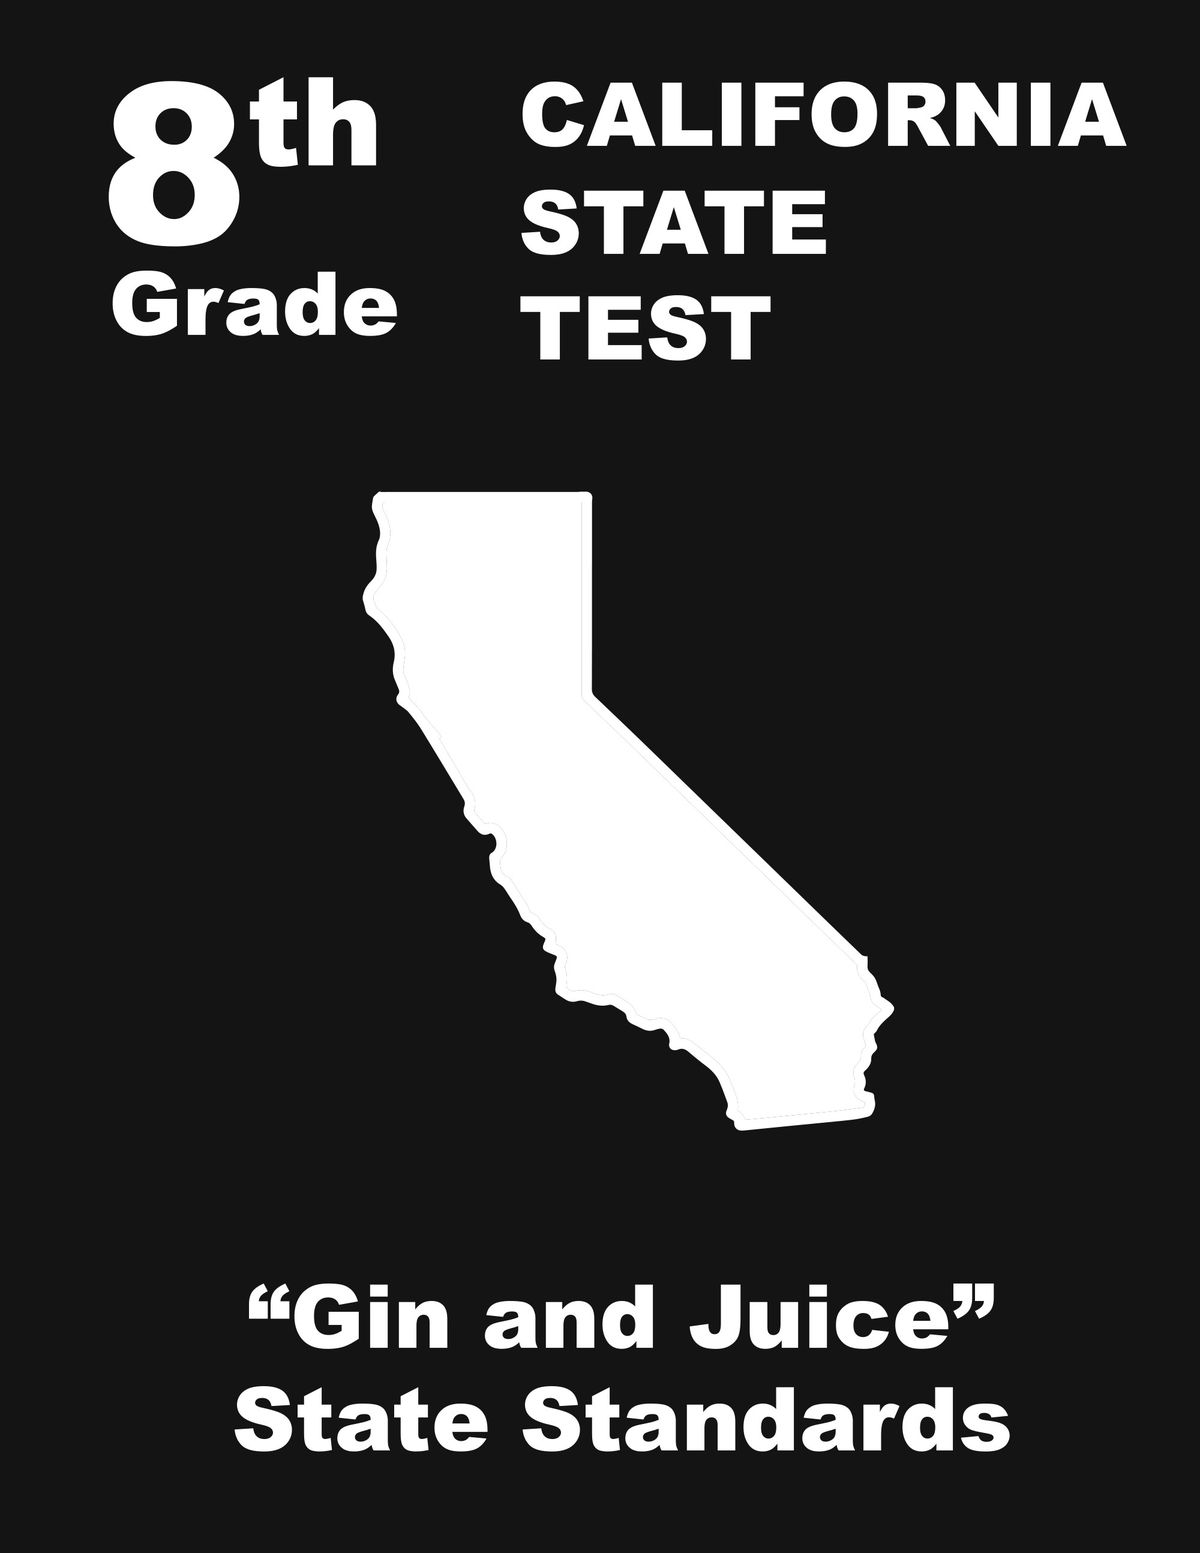 White letters on a black background reading: 8th Grade California State test over an image of Florida. Underneath, it reads: “Gin and Juice” State Standards